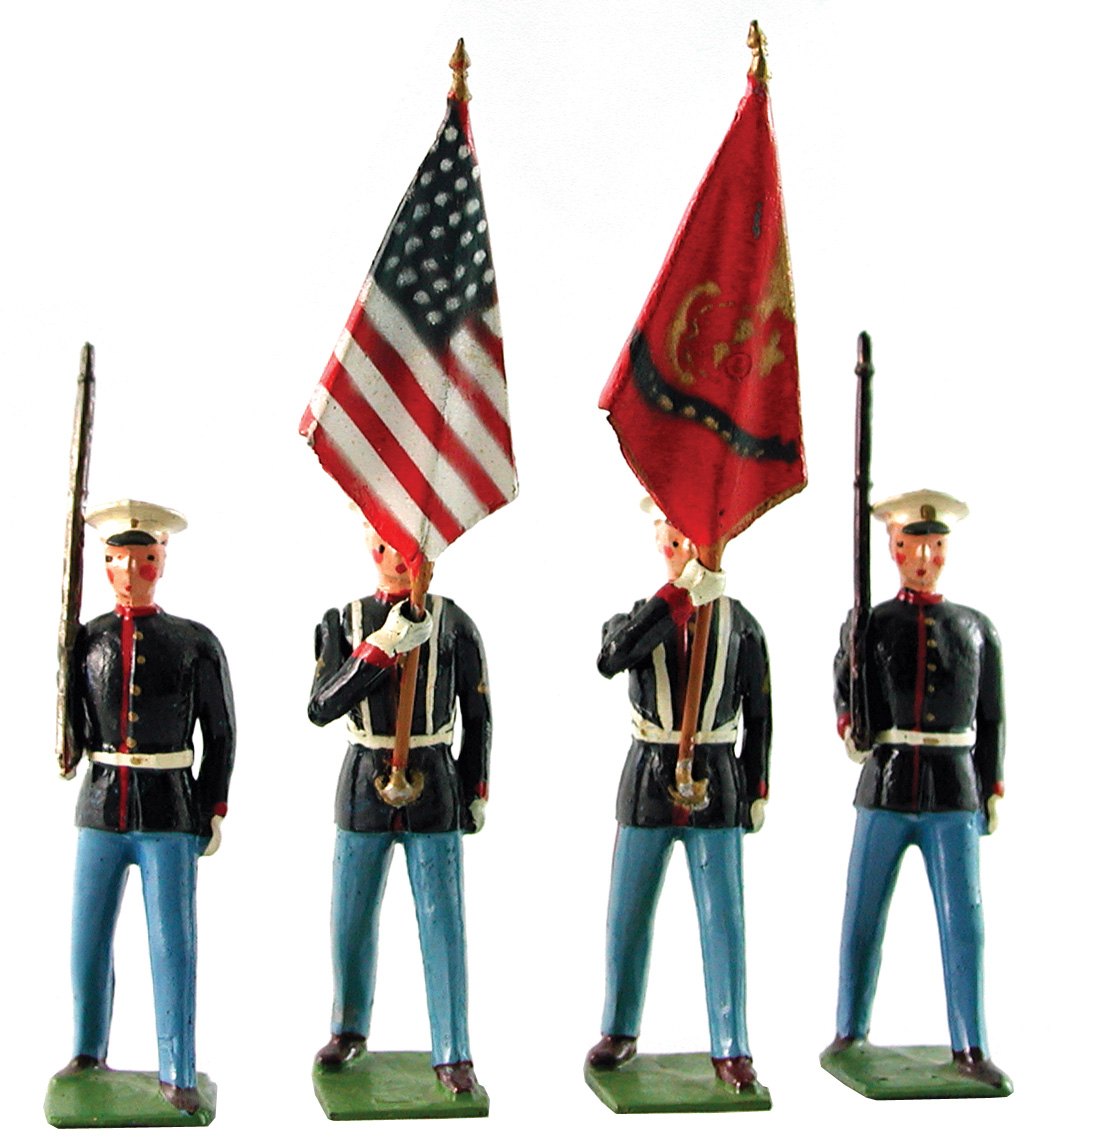 Britains’ method of hollow casting allowed for enhanced detail as demonstrated by its U.S. Marine Corps Color Guard set.